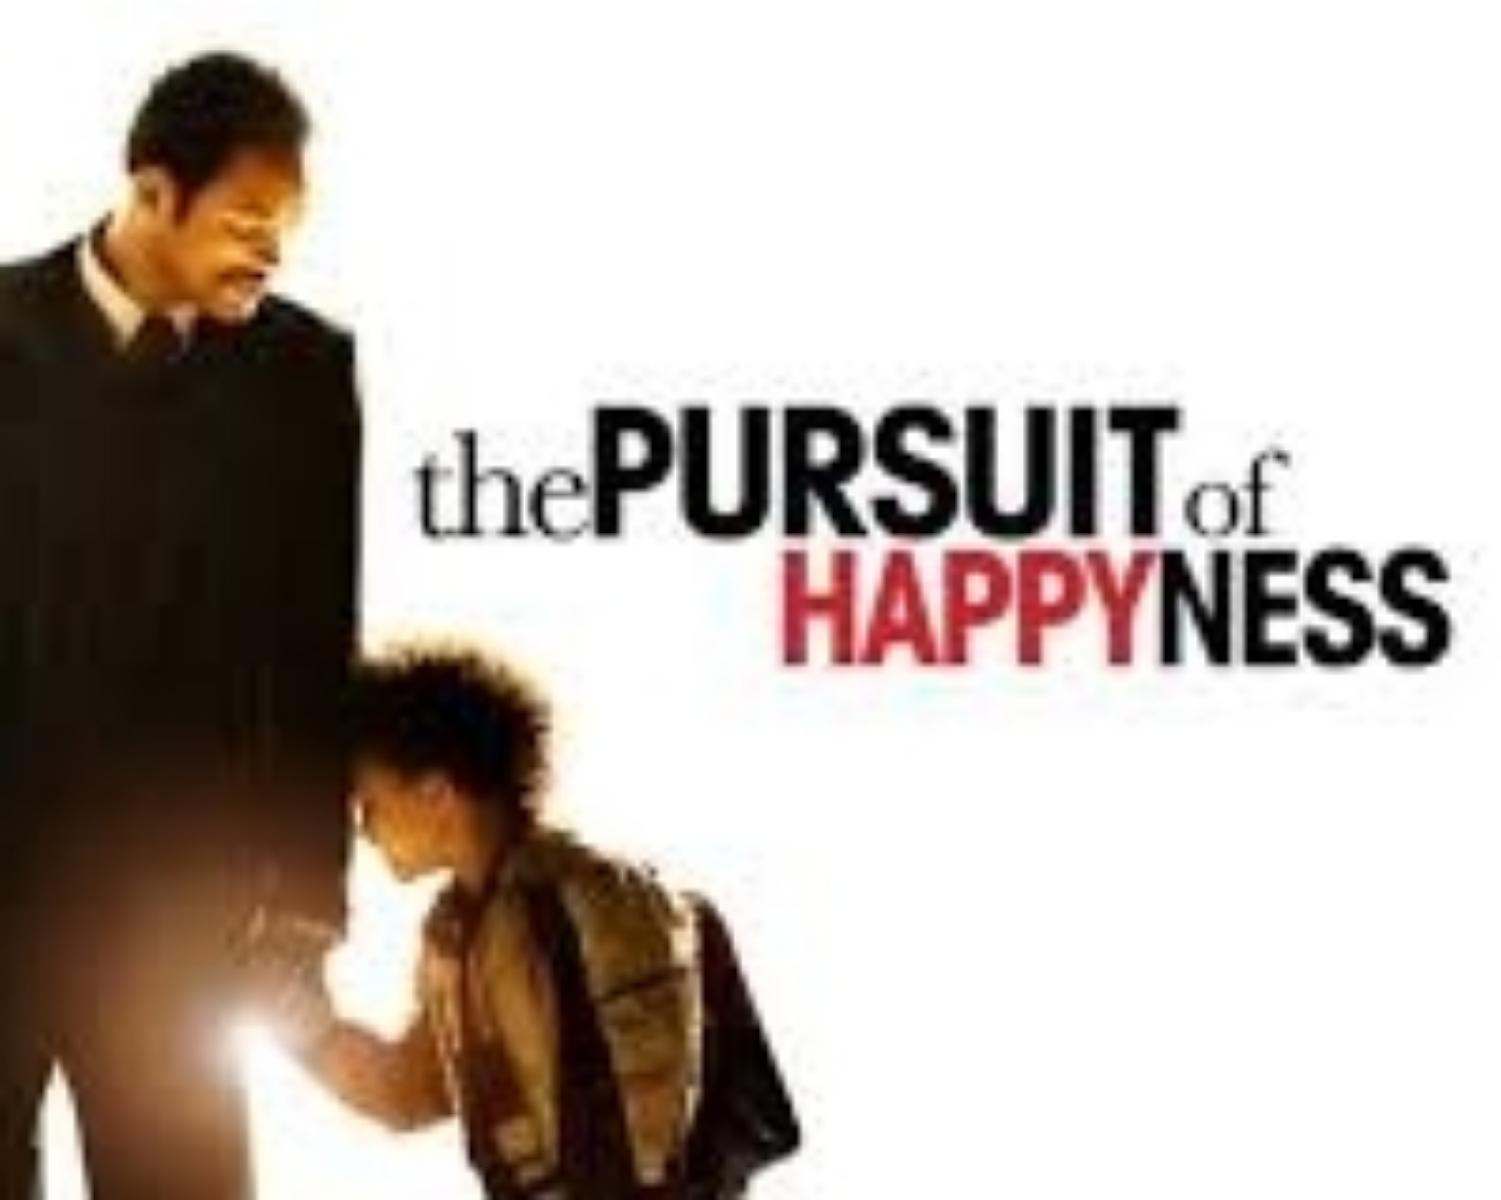 The Pursuit of Happiness makes you unhappy